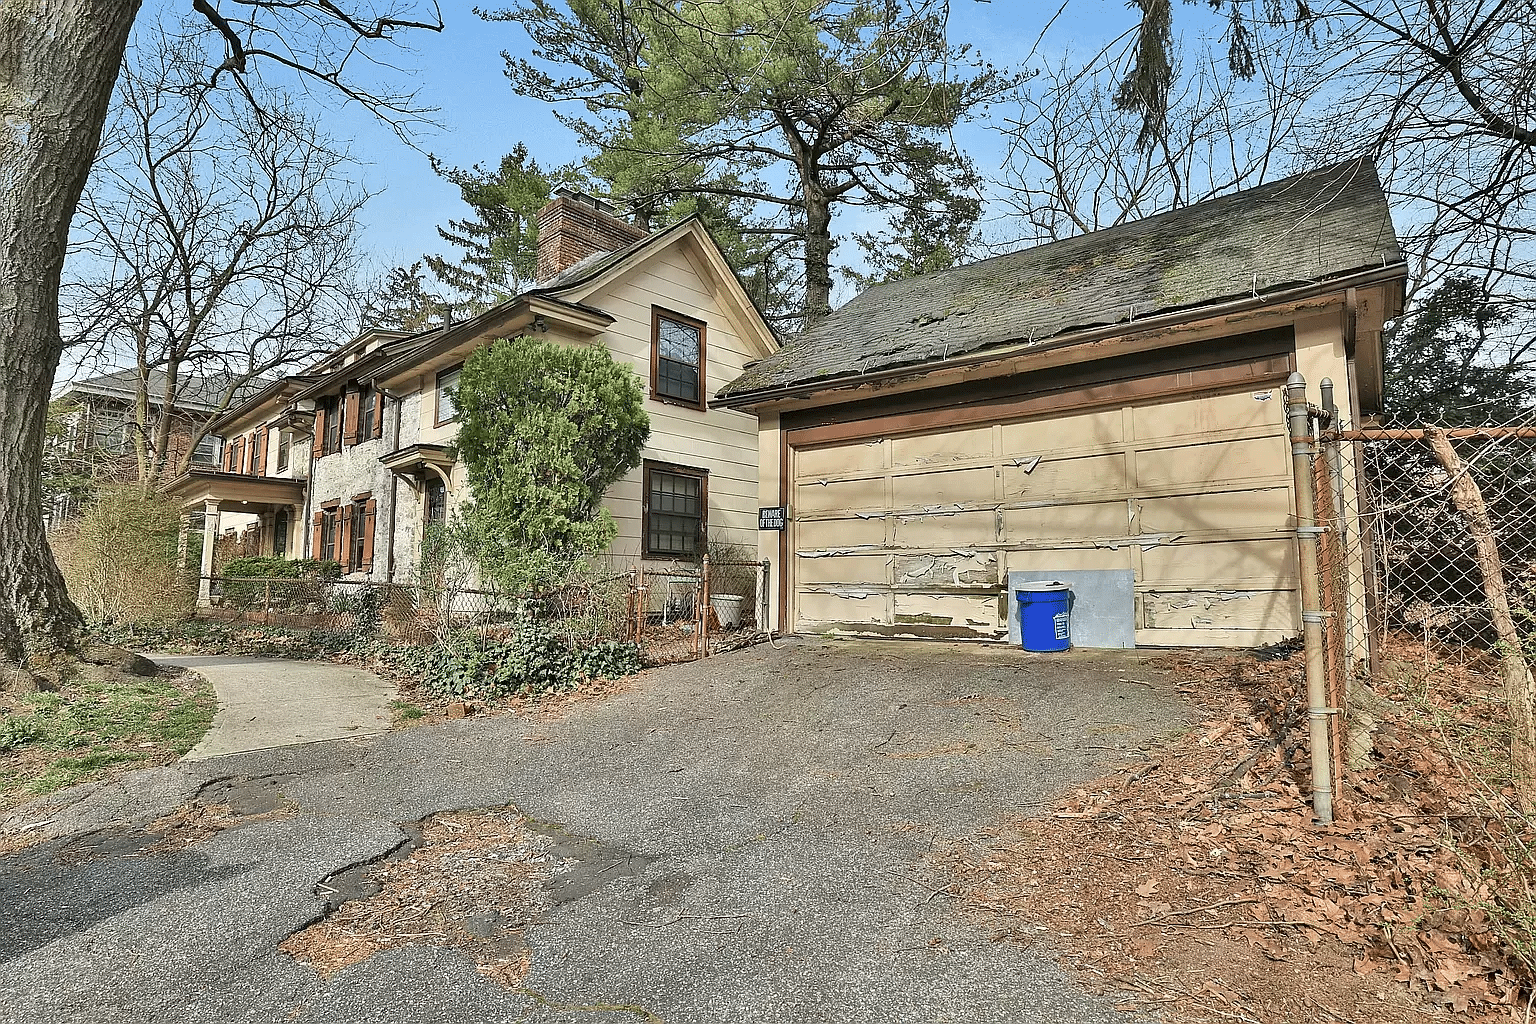 garage adjacent to the house